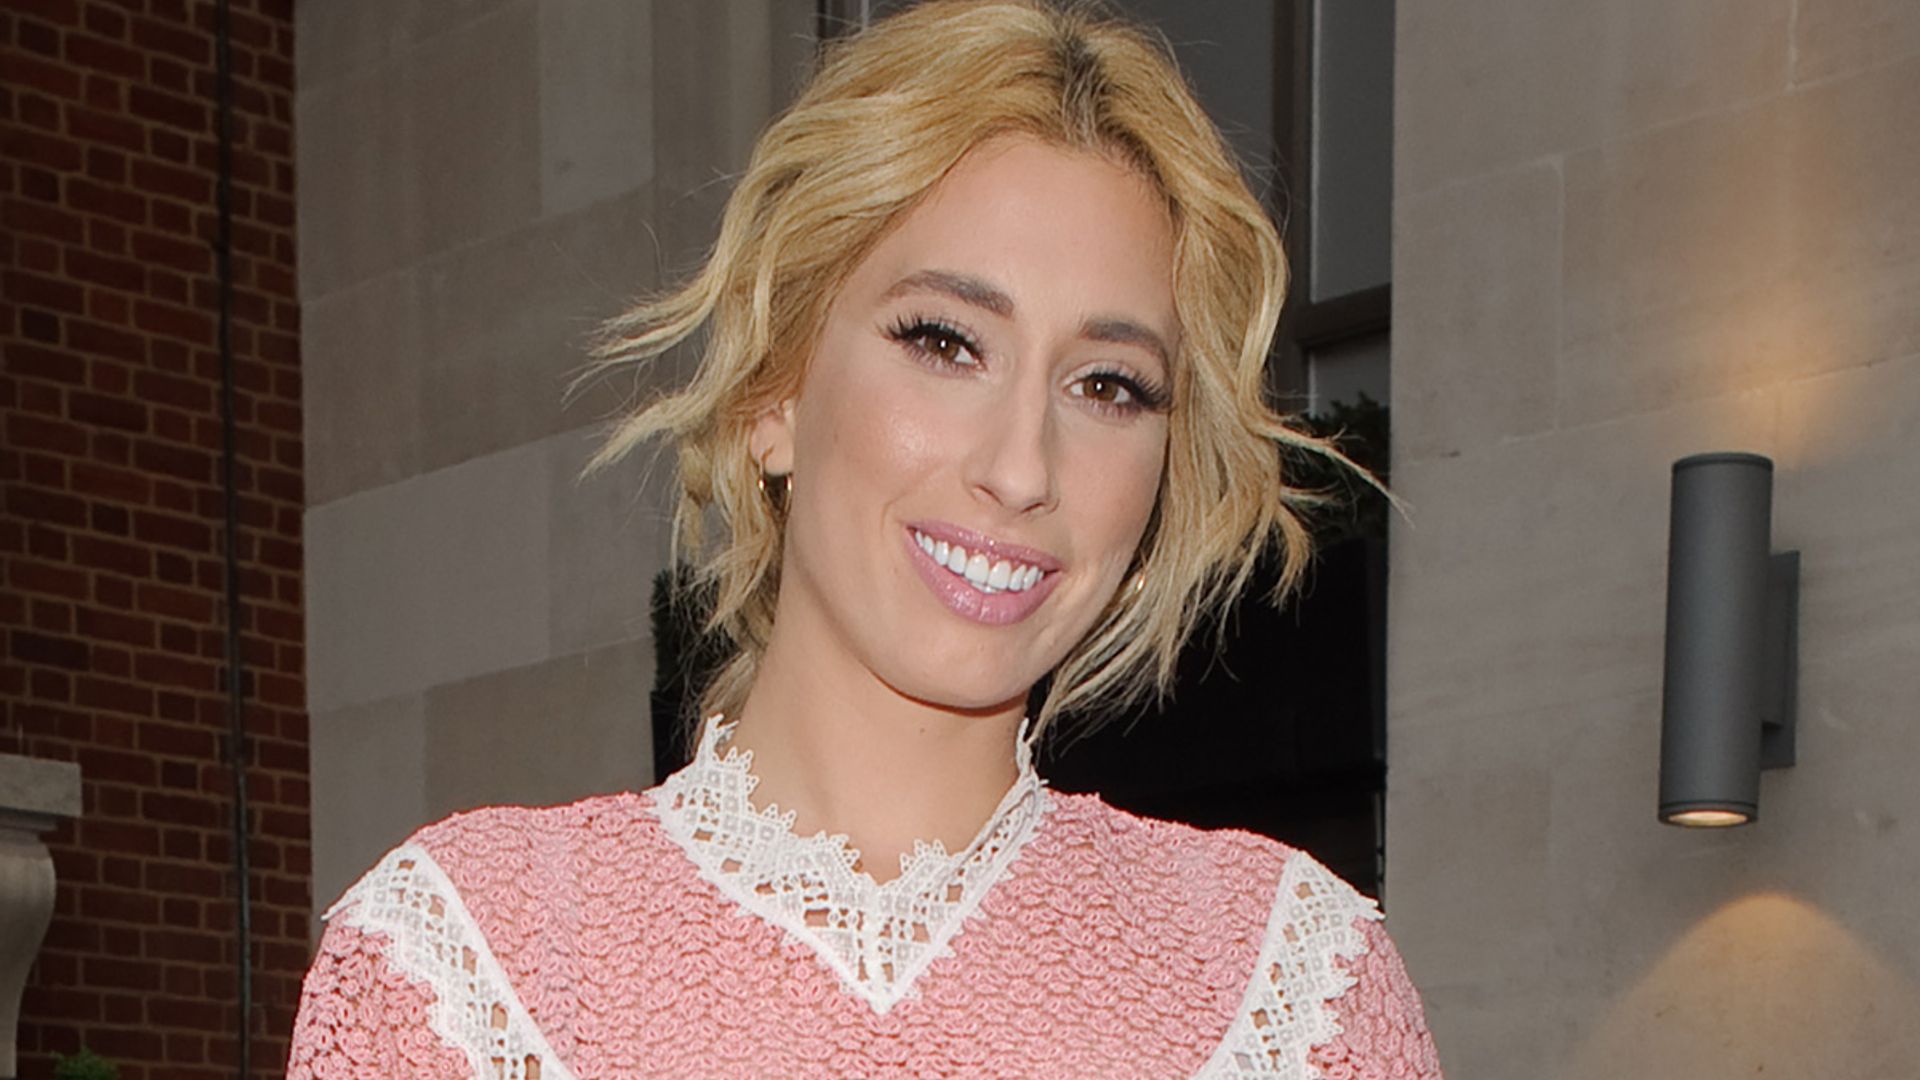 Stacey Solomon wearing pink top with lace trim